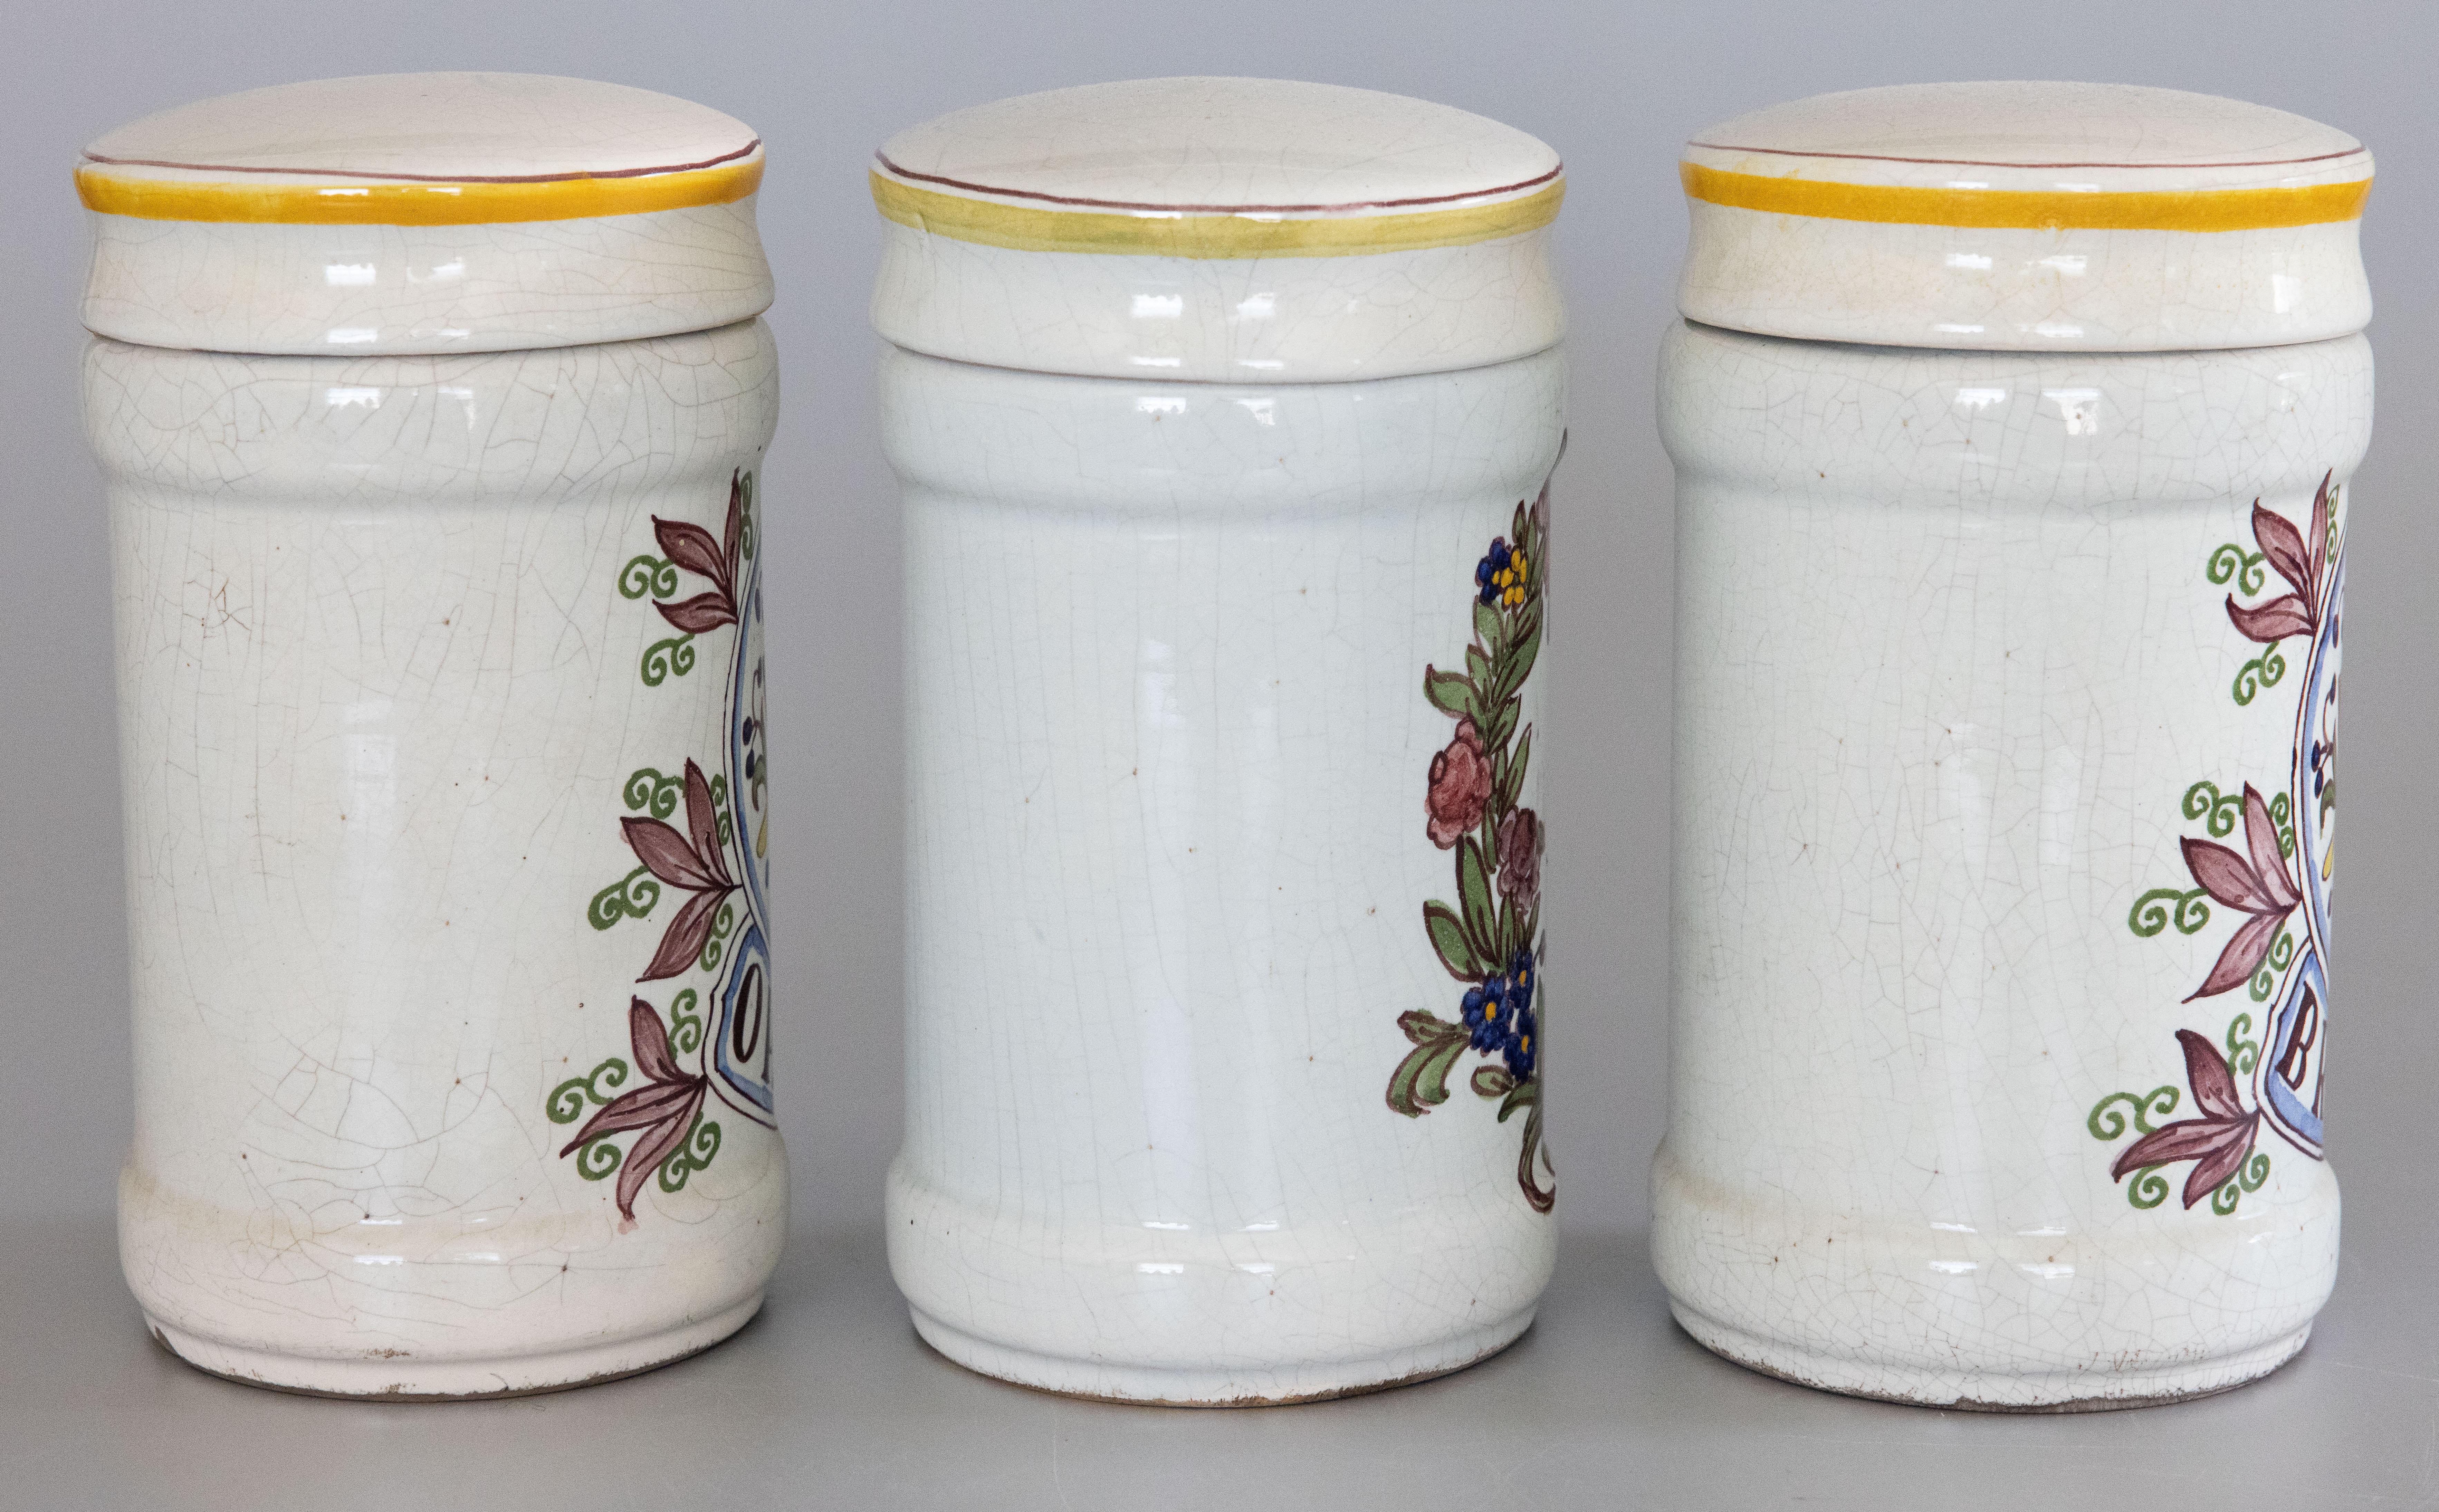 A superb set of three 19th-Century French faience lidded apothecary or pharmacy jars. These fine jars are hand painted with fish, foliage, a garland of flowers and bow, and Latin medicinal names. They would look fabulous displayed on a bathroom